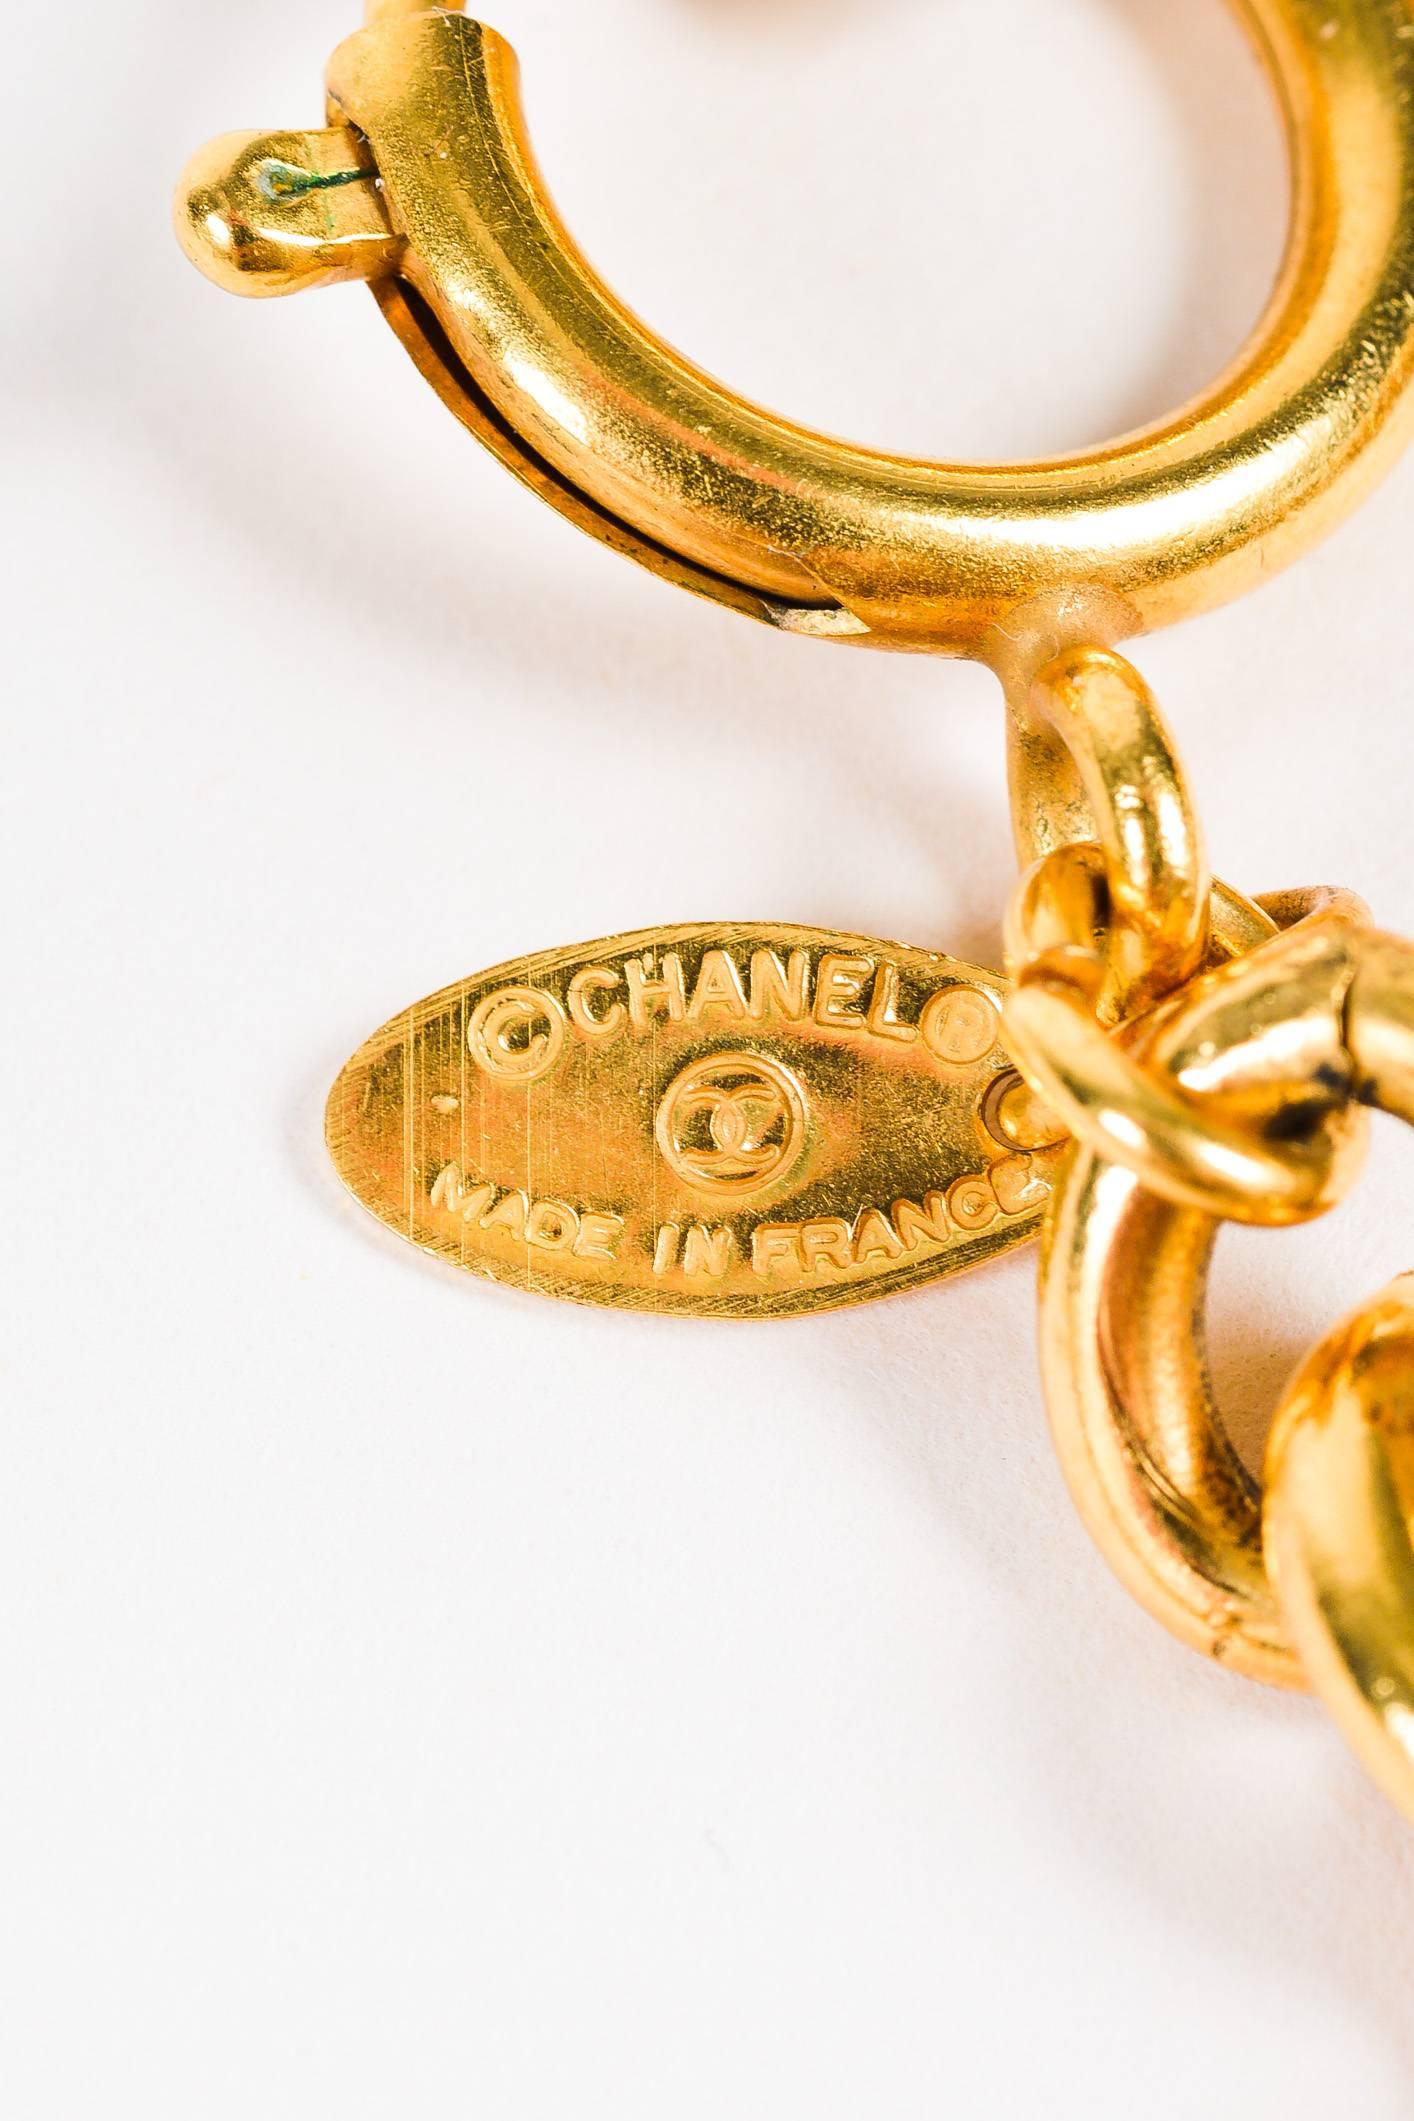 Exude classic Chanel elegance with this vintage statement piece. Gold-tone metal construction. Rolo link chain. Medallion pendants with 'CC' logo and intricate etching. Spring clasp closure.
Vintage, circa early 1980's 

Measurements
Total